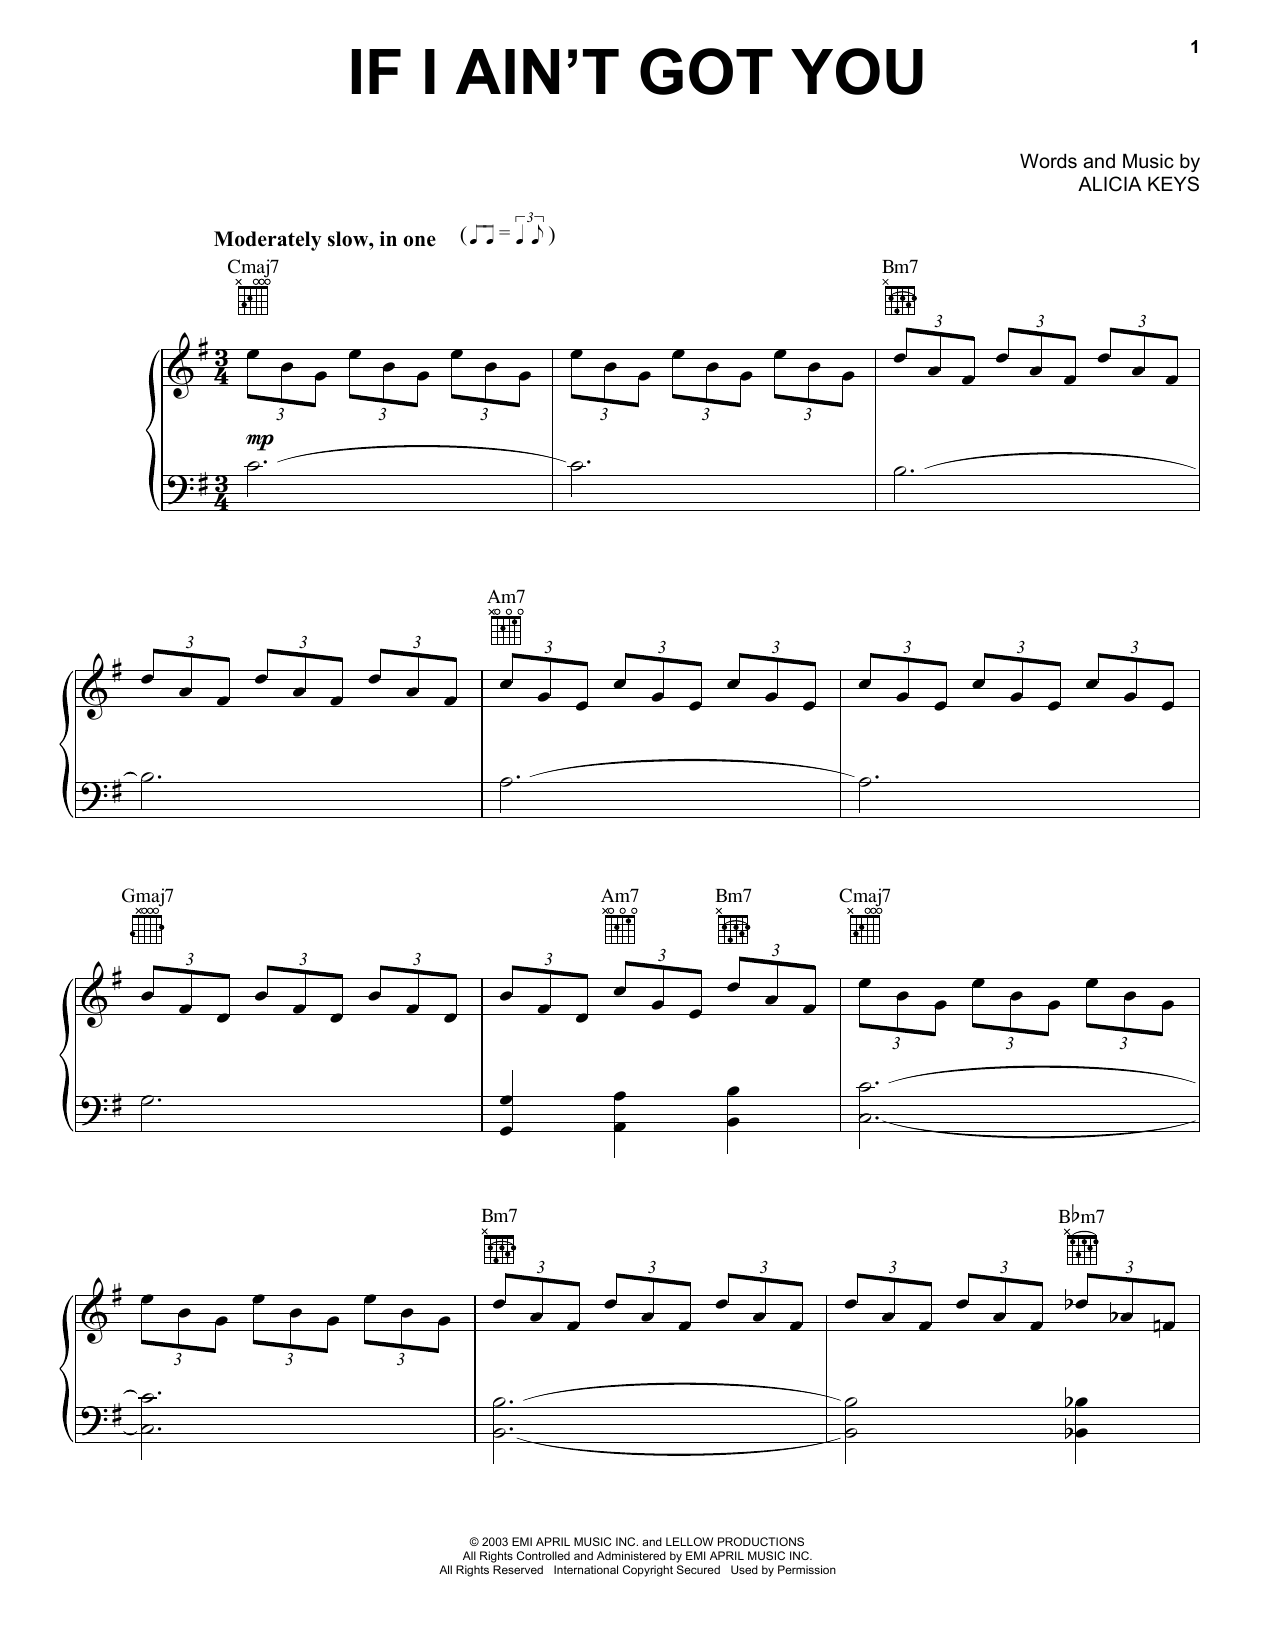 Alicia Keys If I Ain't Got You sheet music notes and chords. Download Printable PDF.